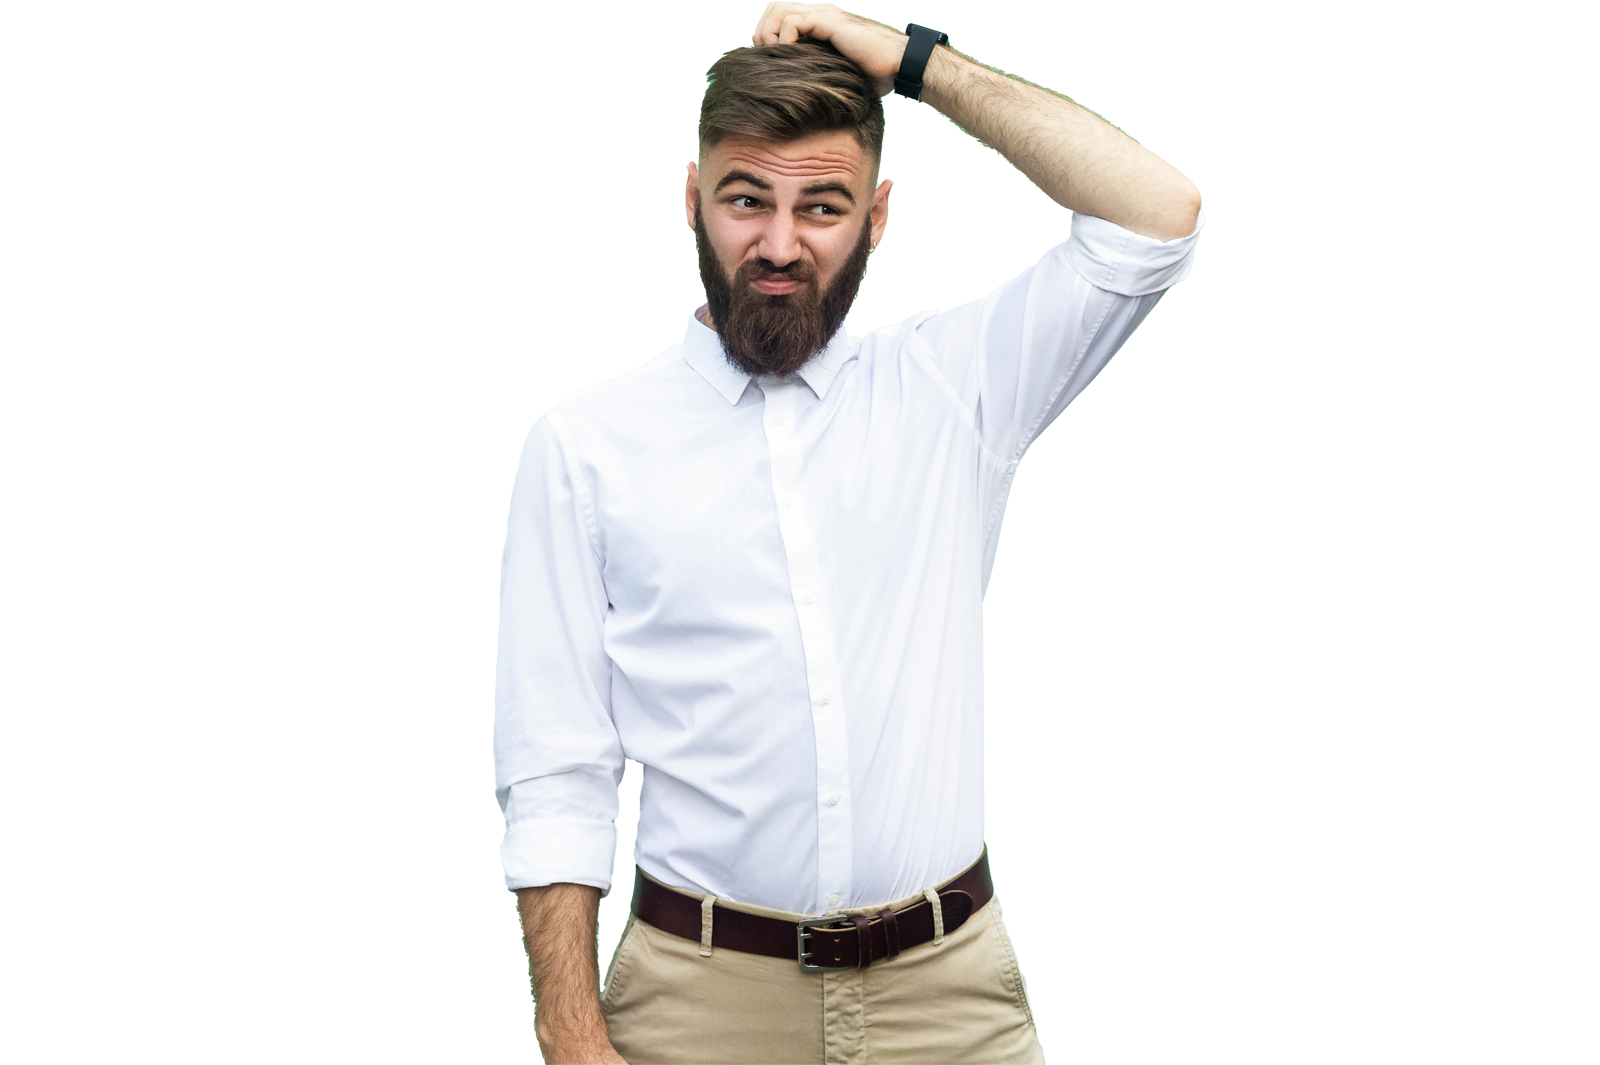 A man with a beard, wearing a white shirt and beige pants, playfully scratching his head and smirking